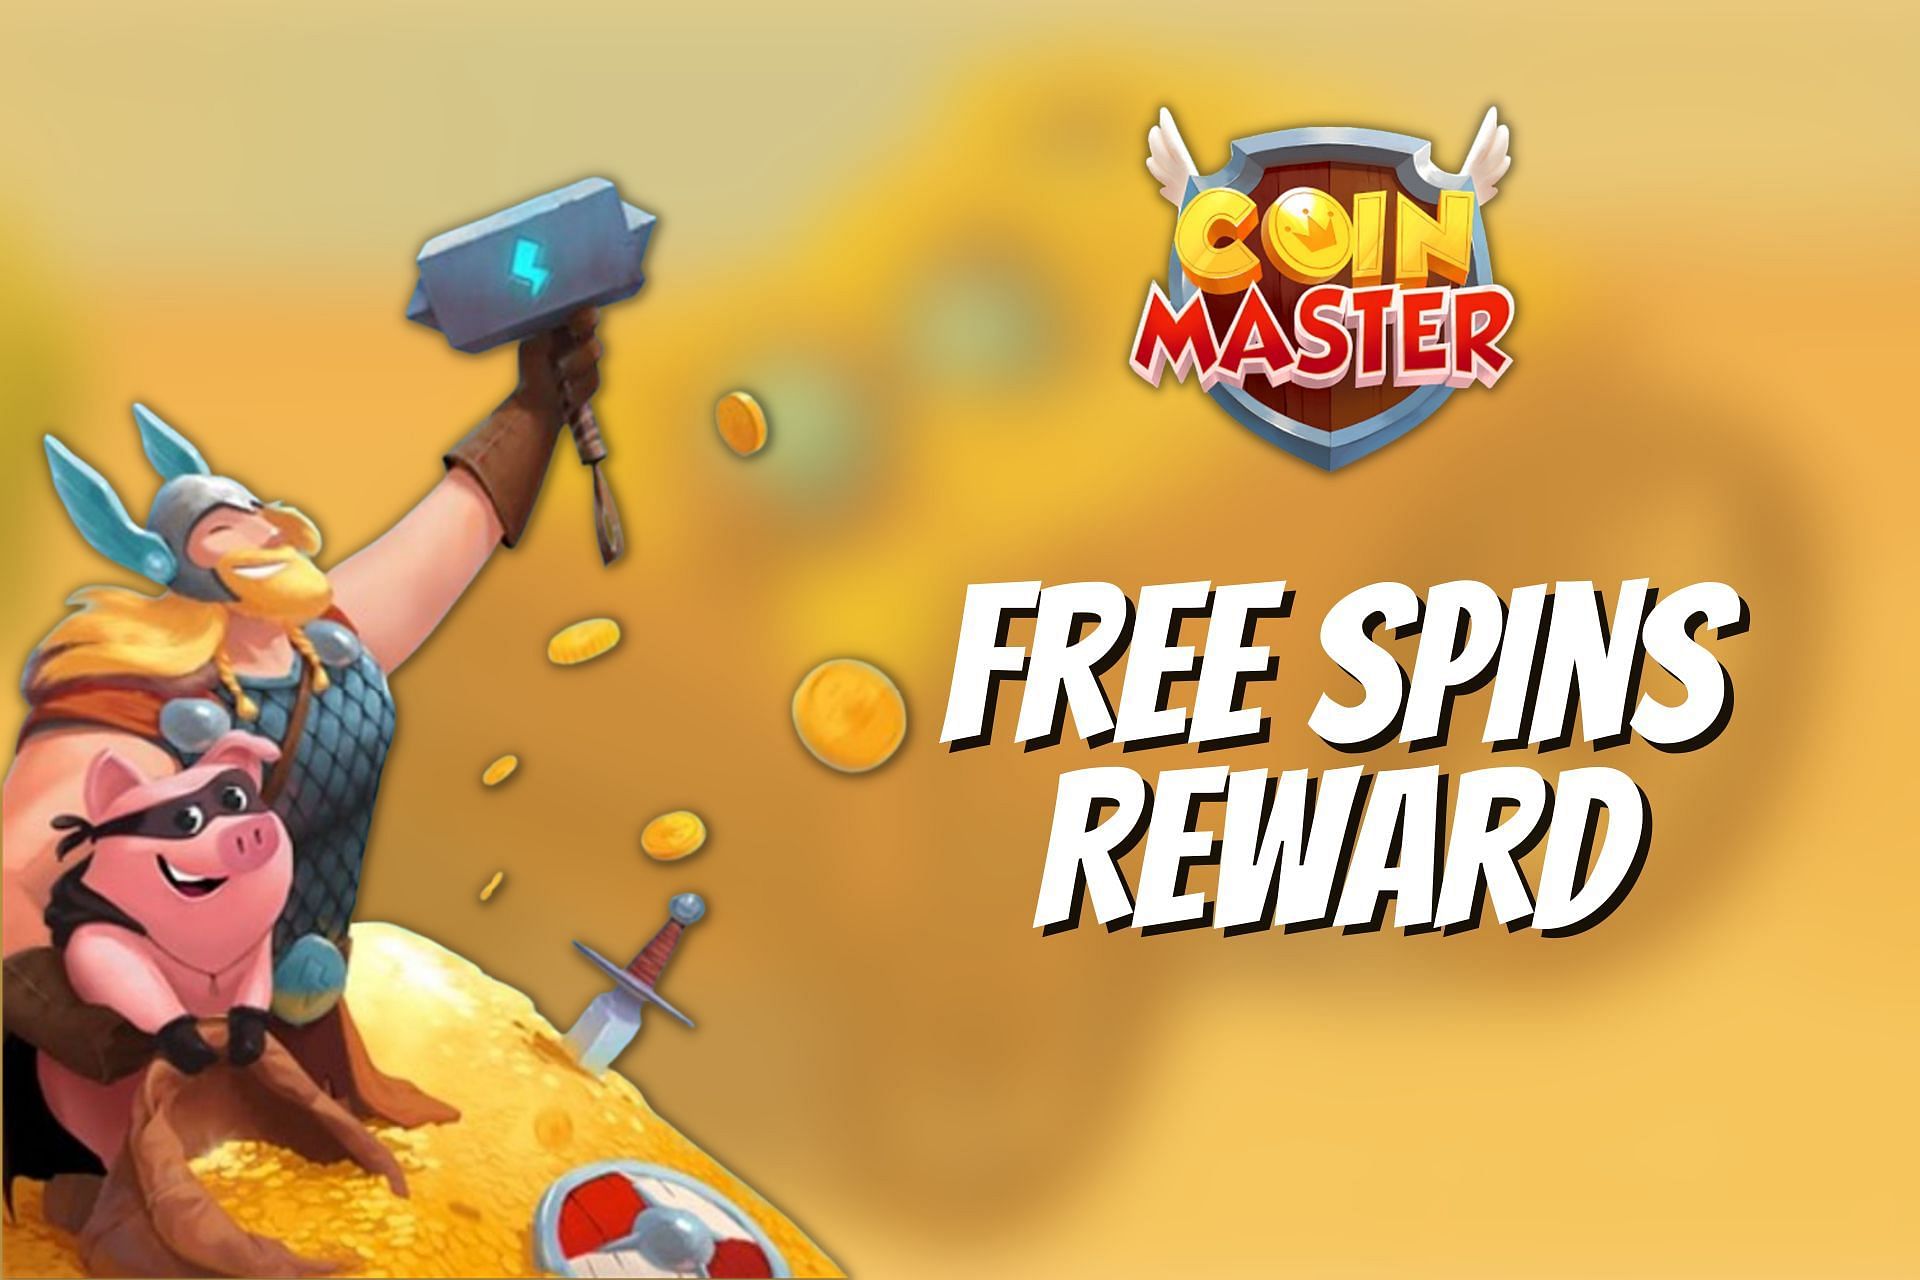 Coin master free spins 11.01.2020